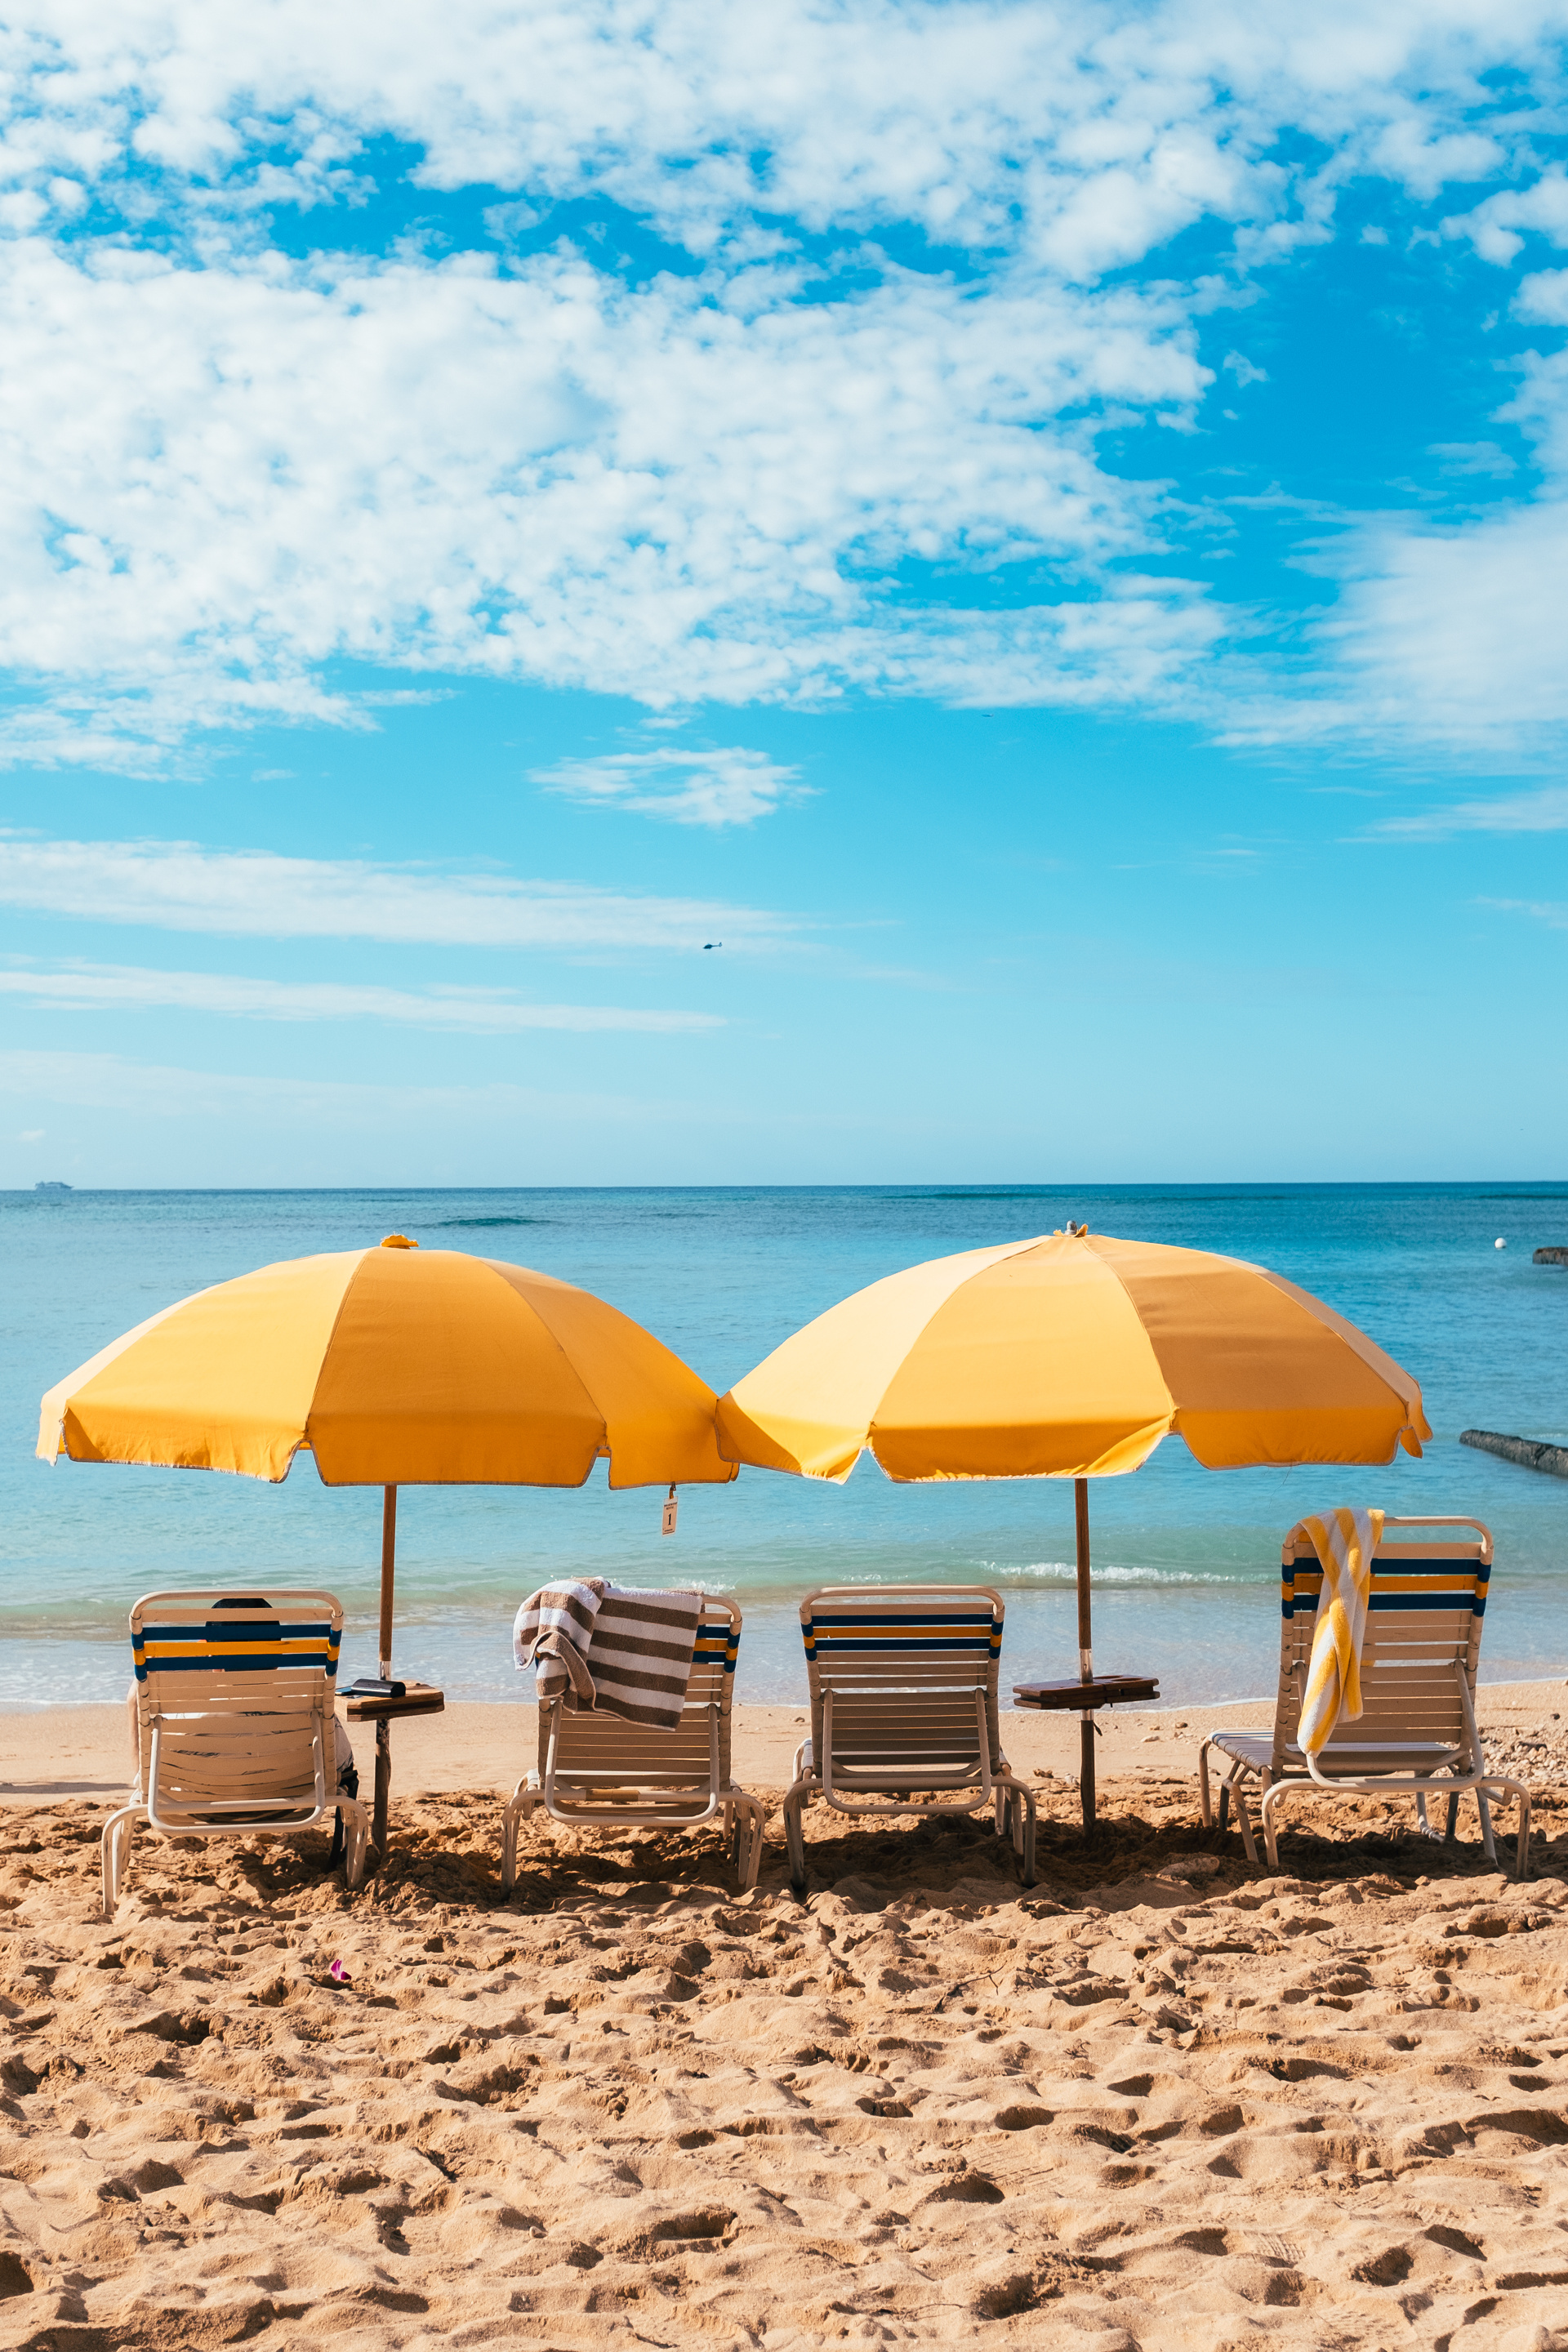 Beach Umbrella: A covering that serves as a roof to shelter an area from the sunlight. 1920x2880 HD Wallpaper.